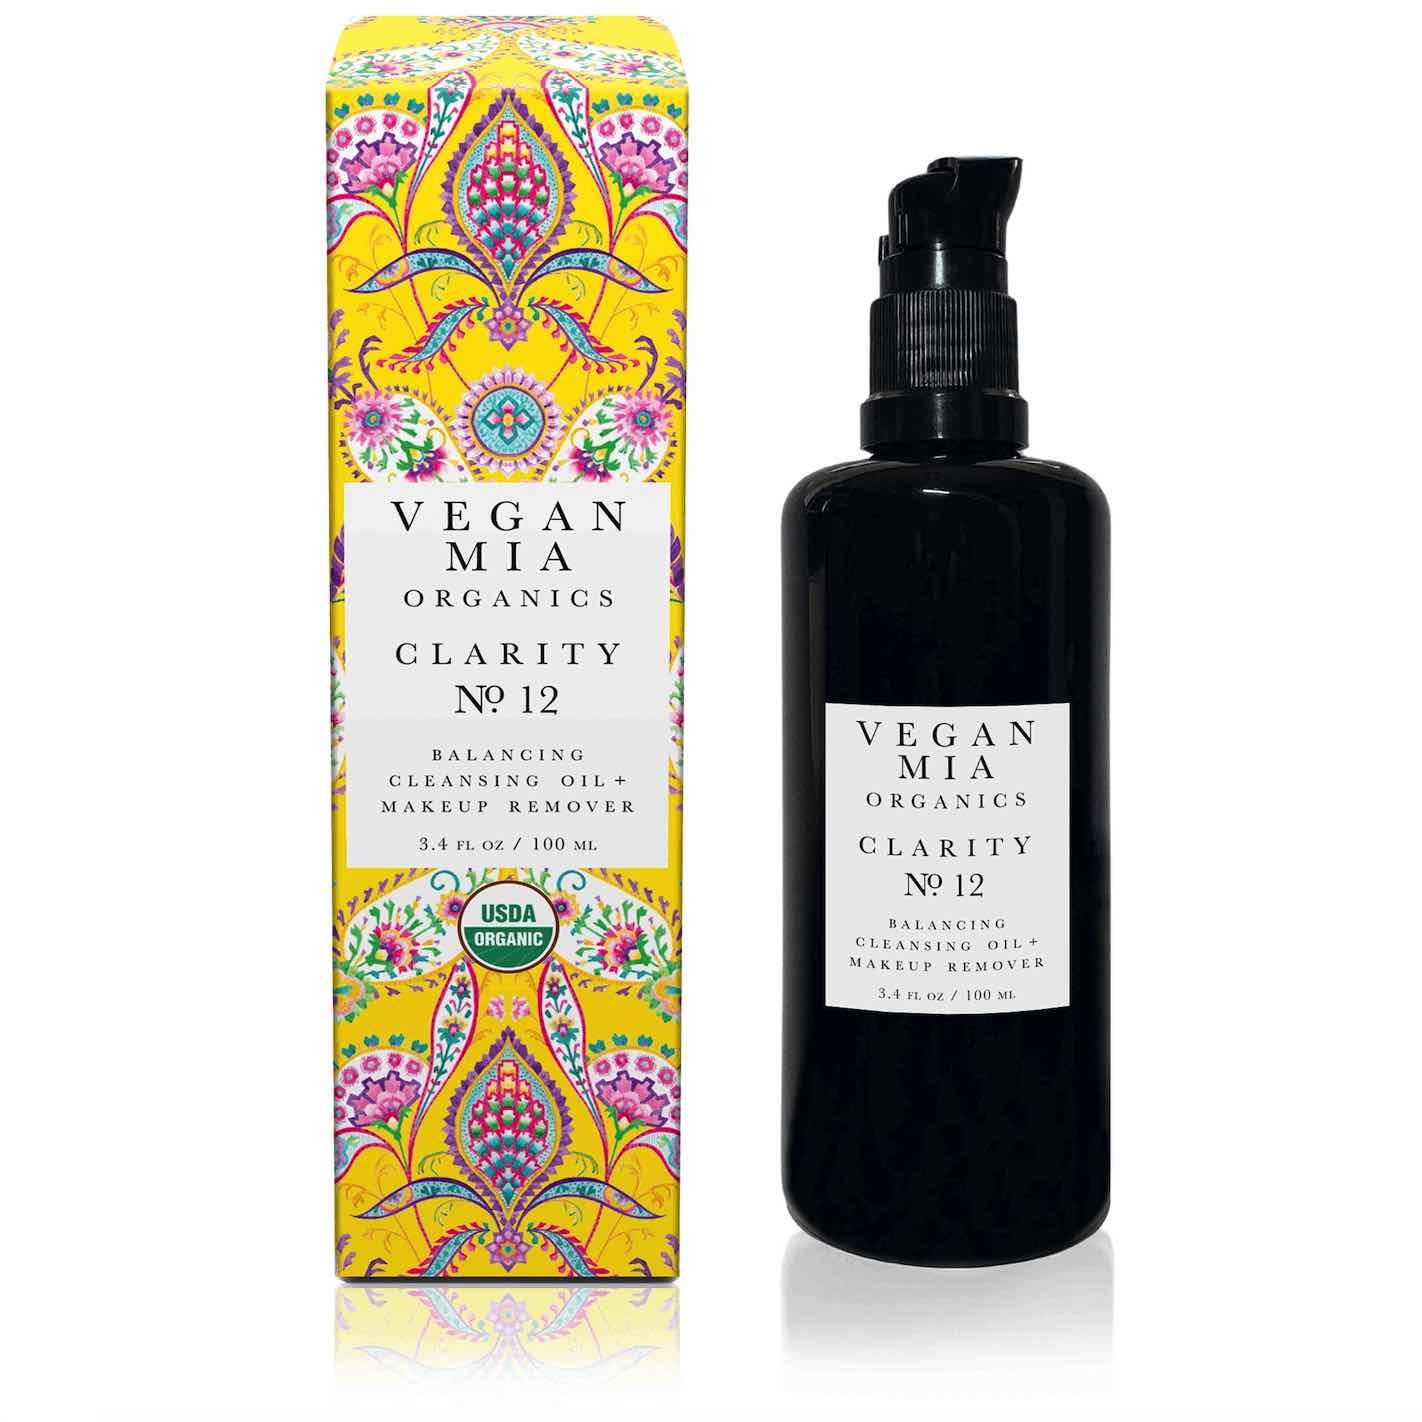 Vegan Mia Organics Clarity Balancing Cleansing Oil and Makeup Remover Bottle and Box on White Background